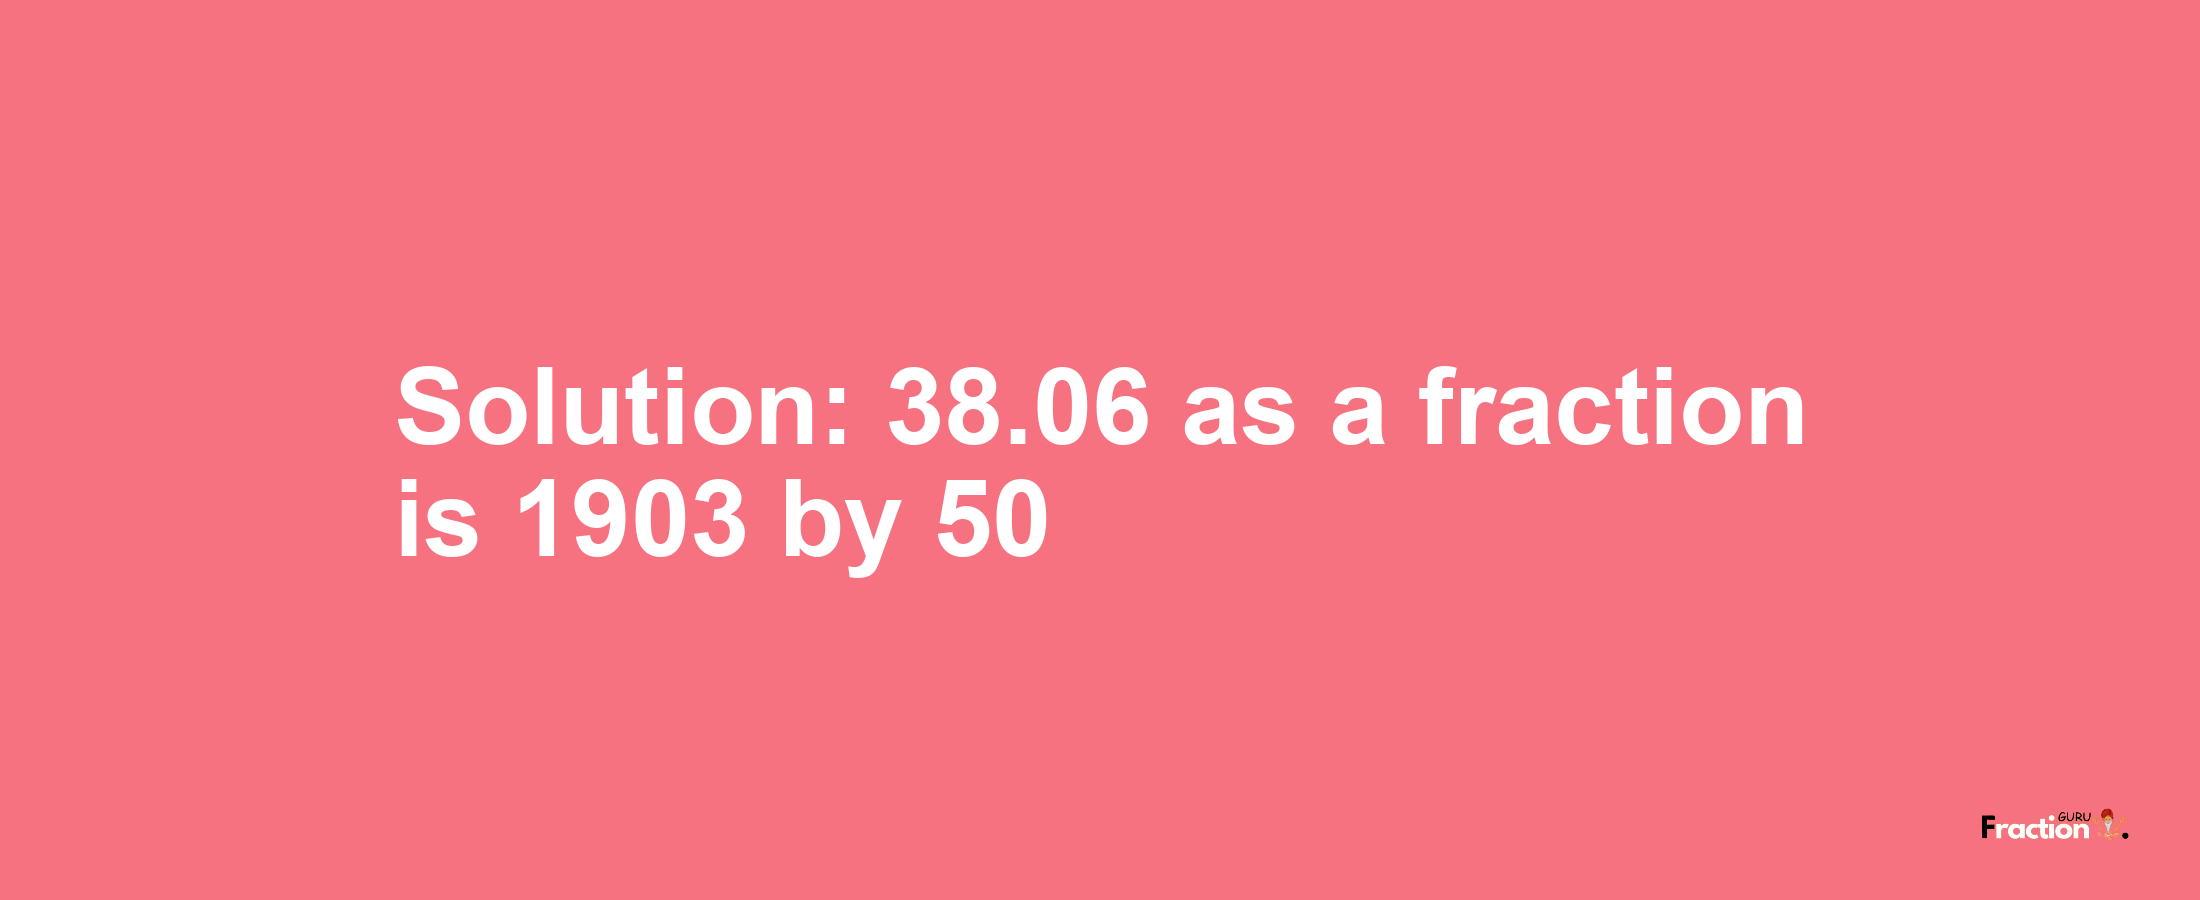 Solution:38.06 as a fraction is 1903/50